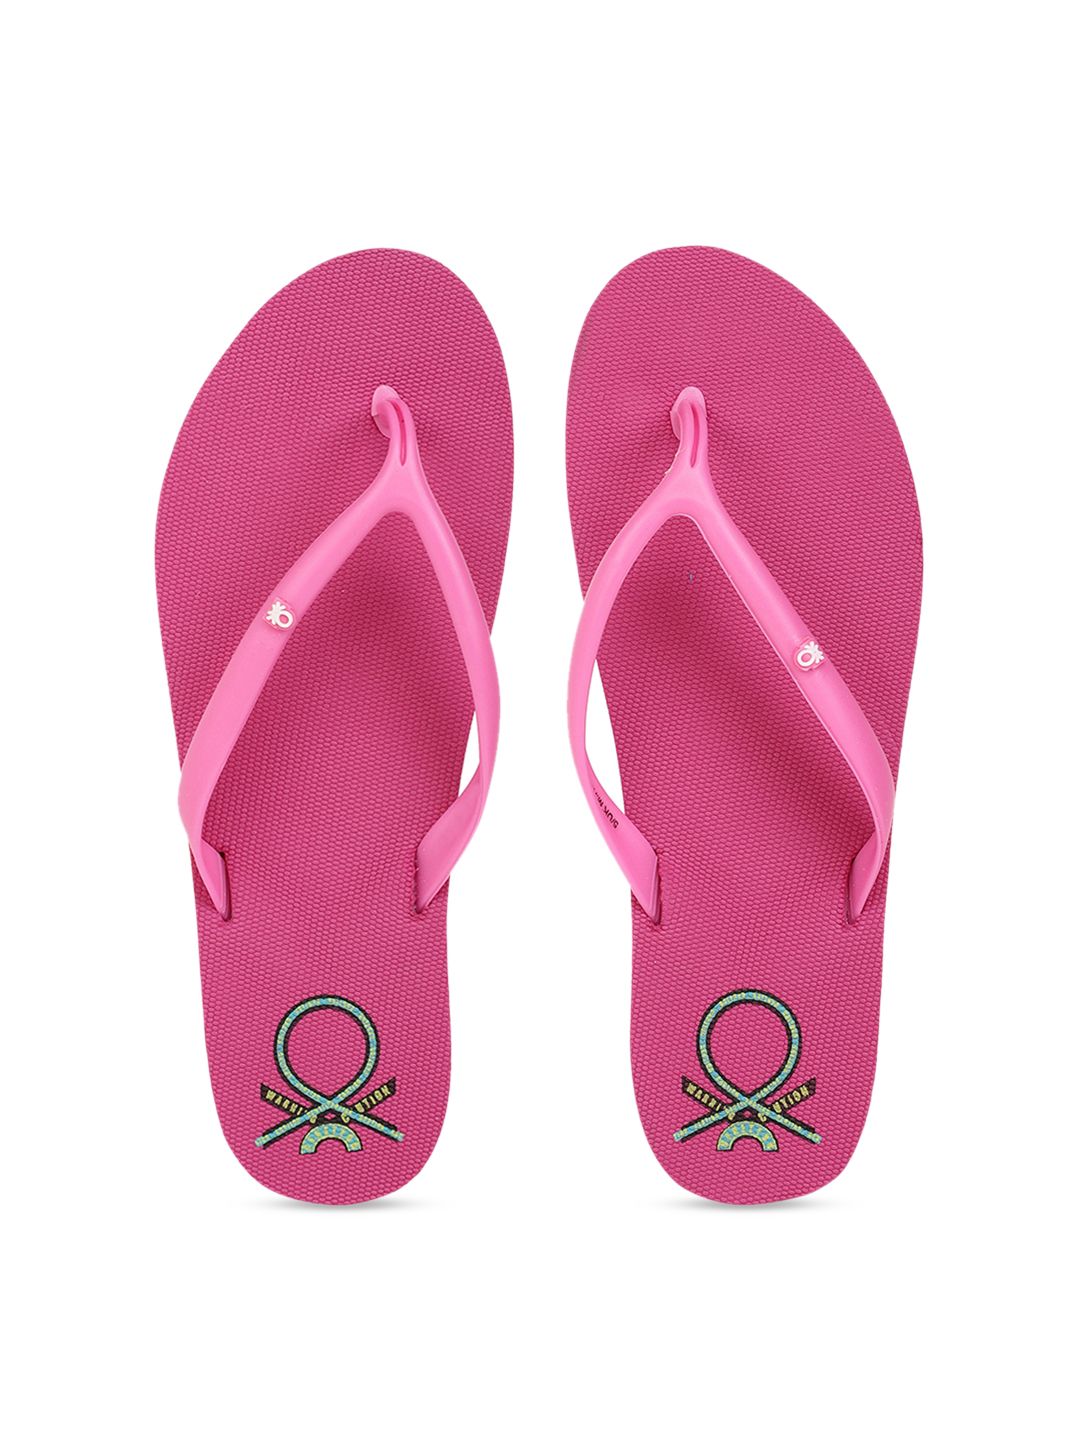 United Colors of Benetton Women Pink Solid Thong Flip-Flops Price in India